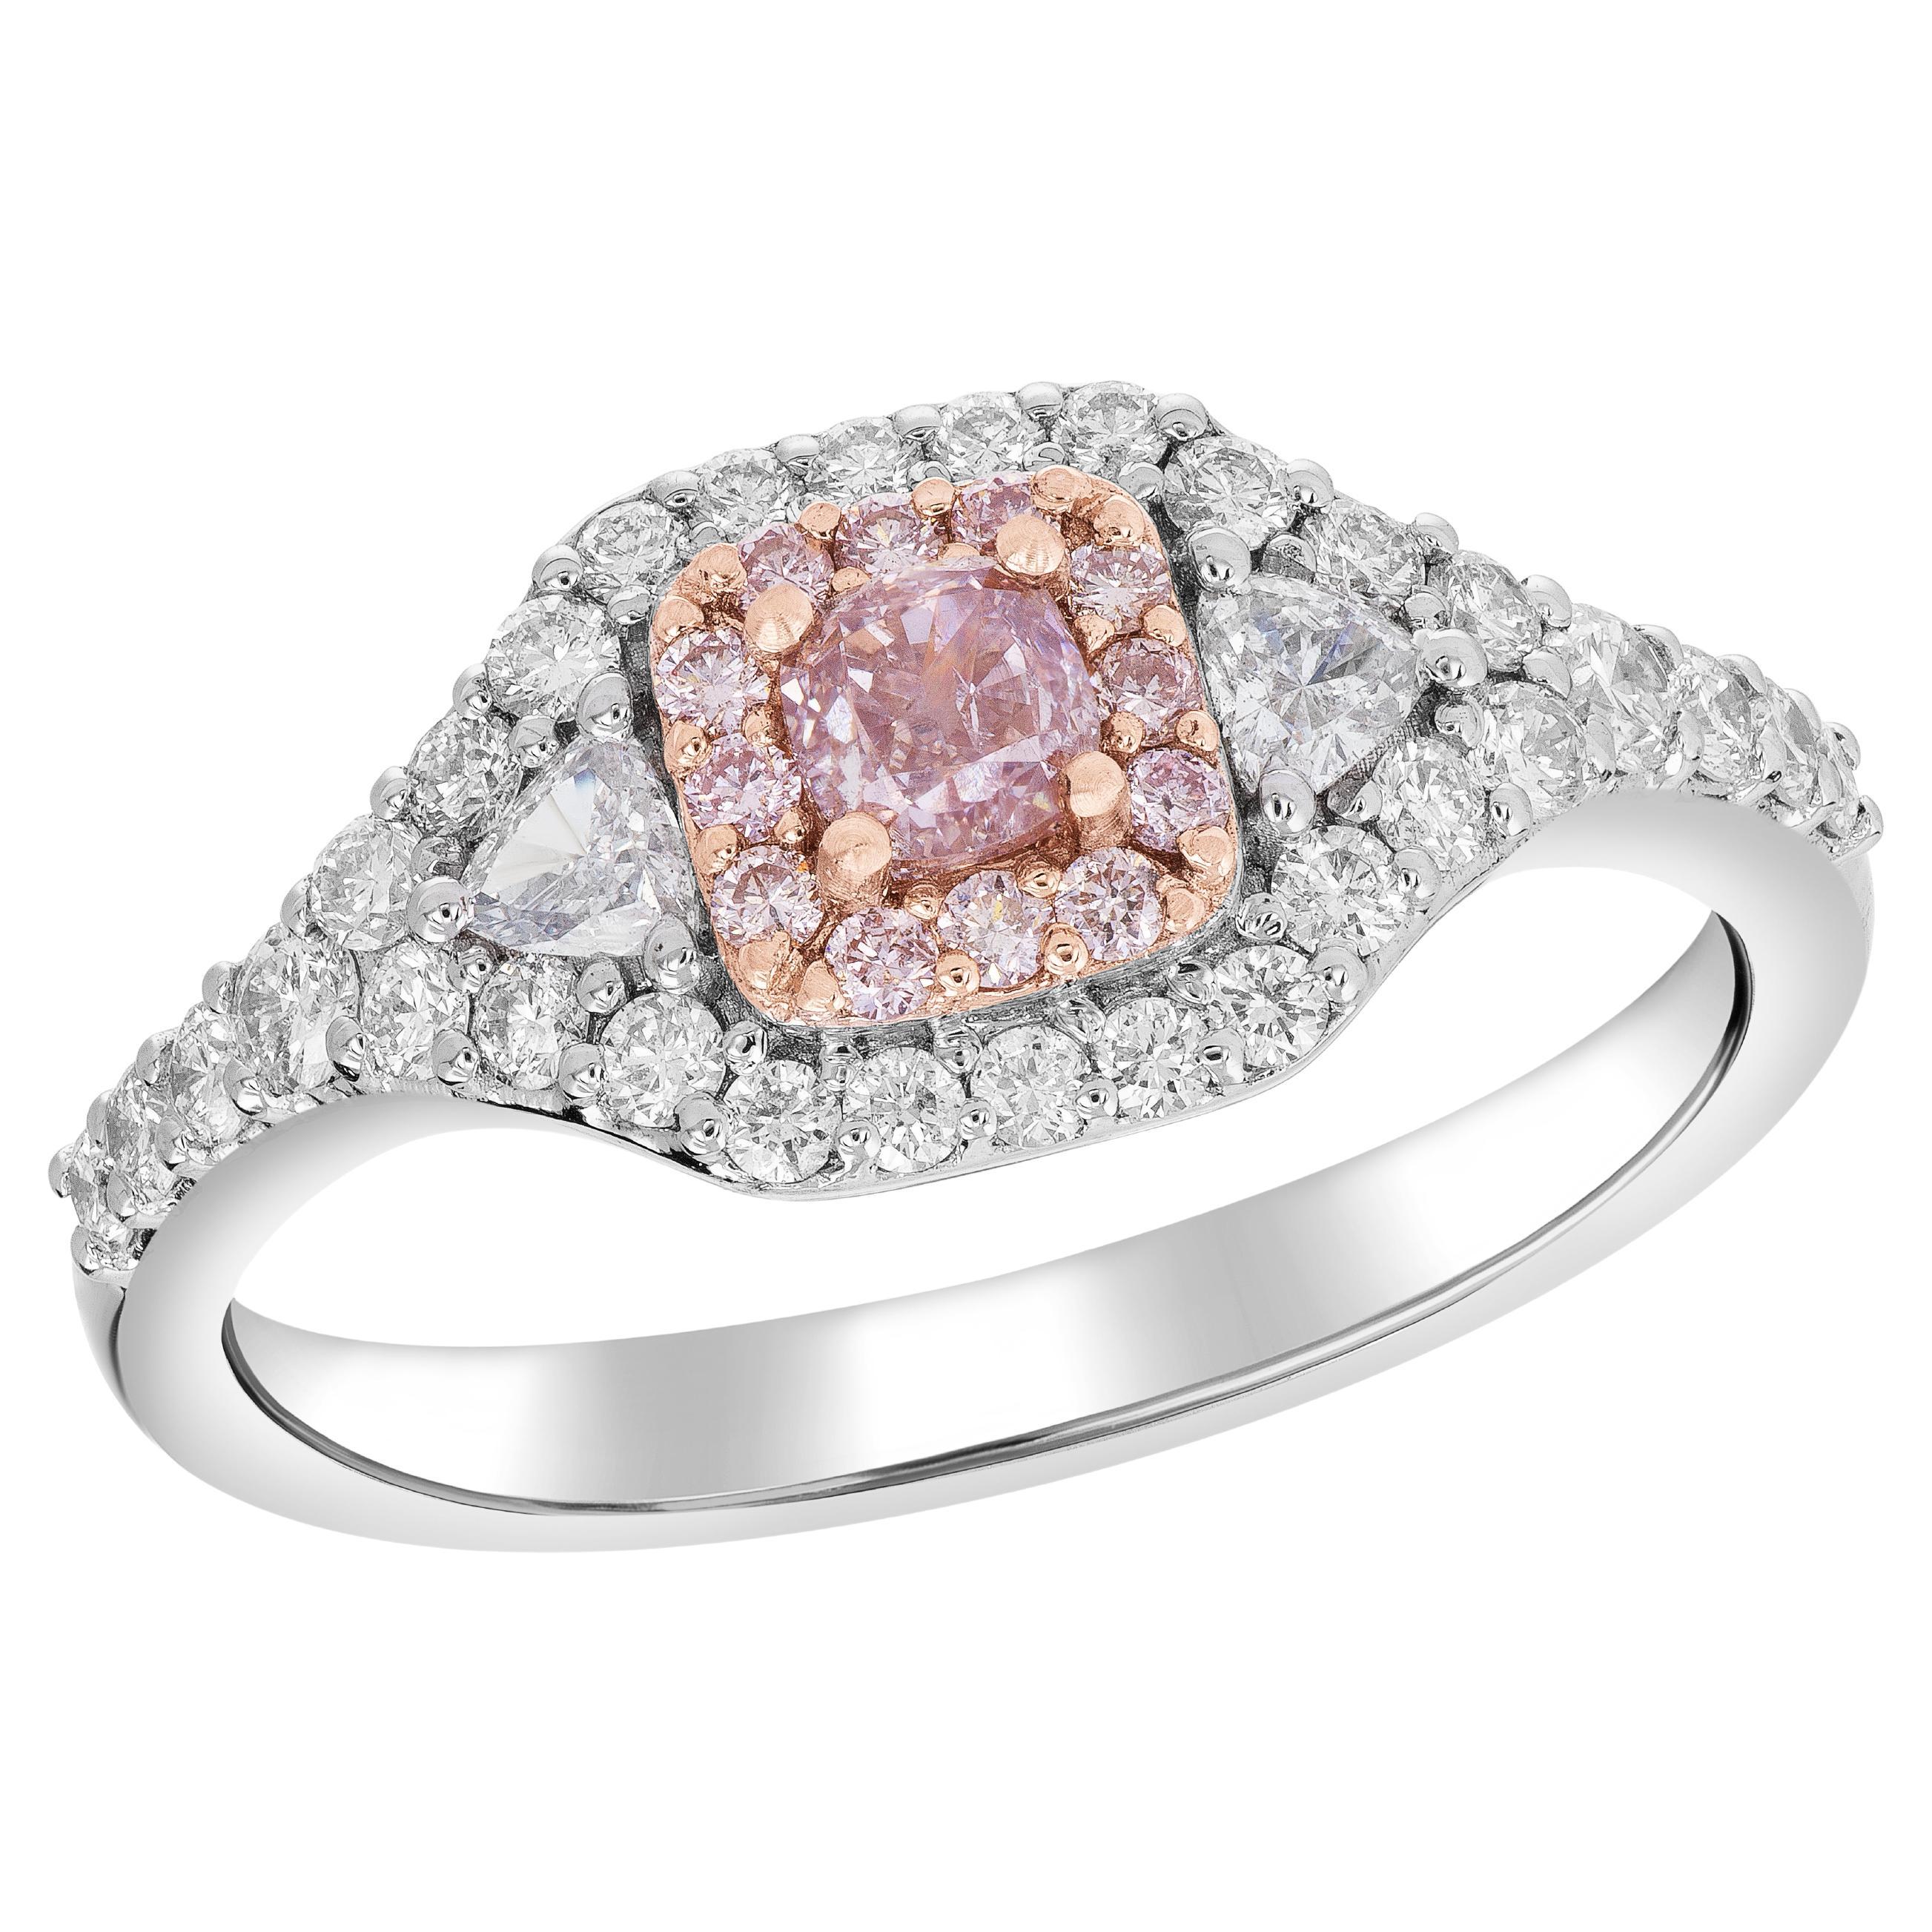 Fancy Pink Diamond Engagement Ring Set with a 0.27 Carat Center Cushion For Sale